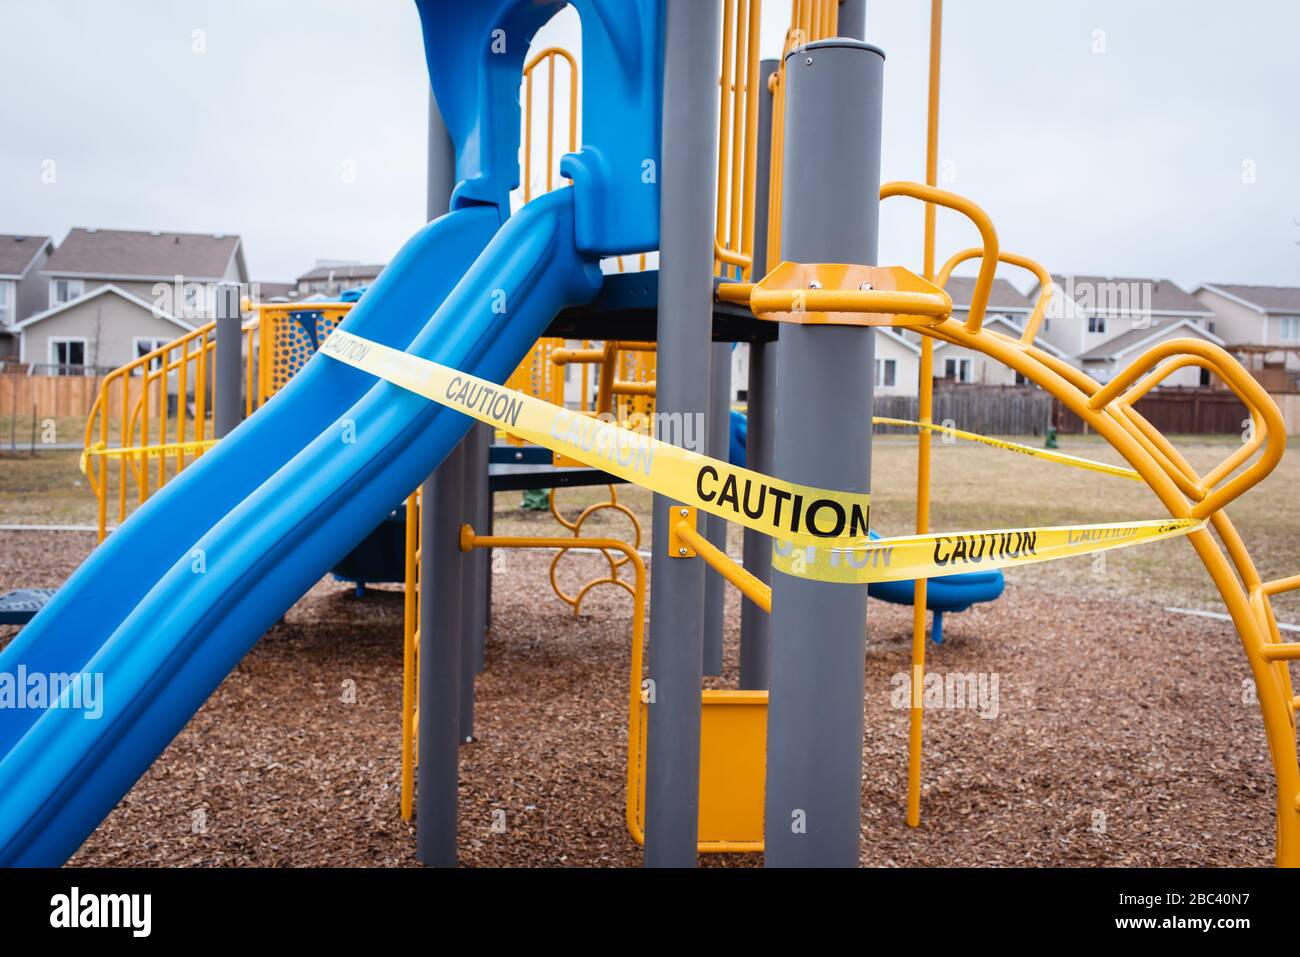 Playground equipment wrapped in caution tape during Covid 19 pandemic. Stock Photo